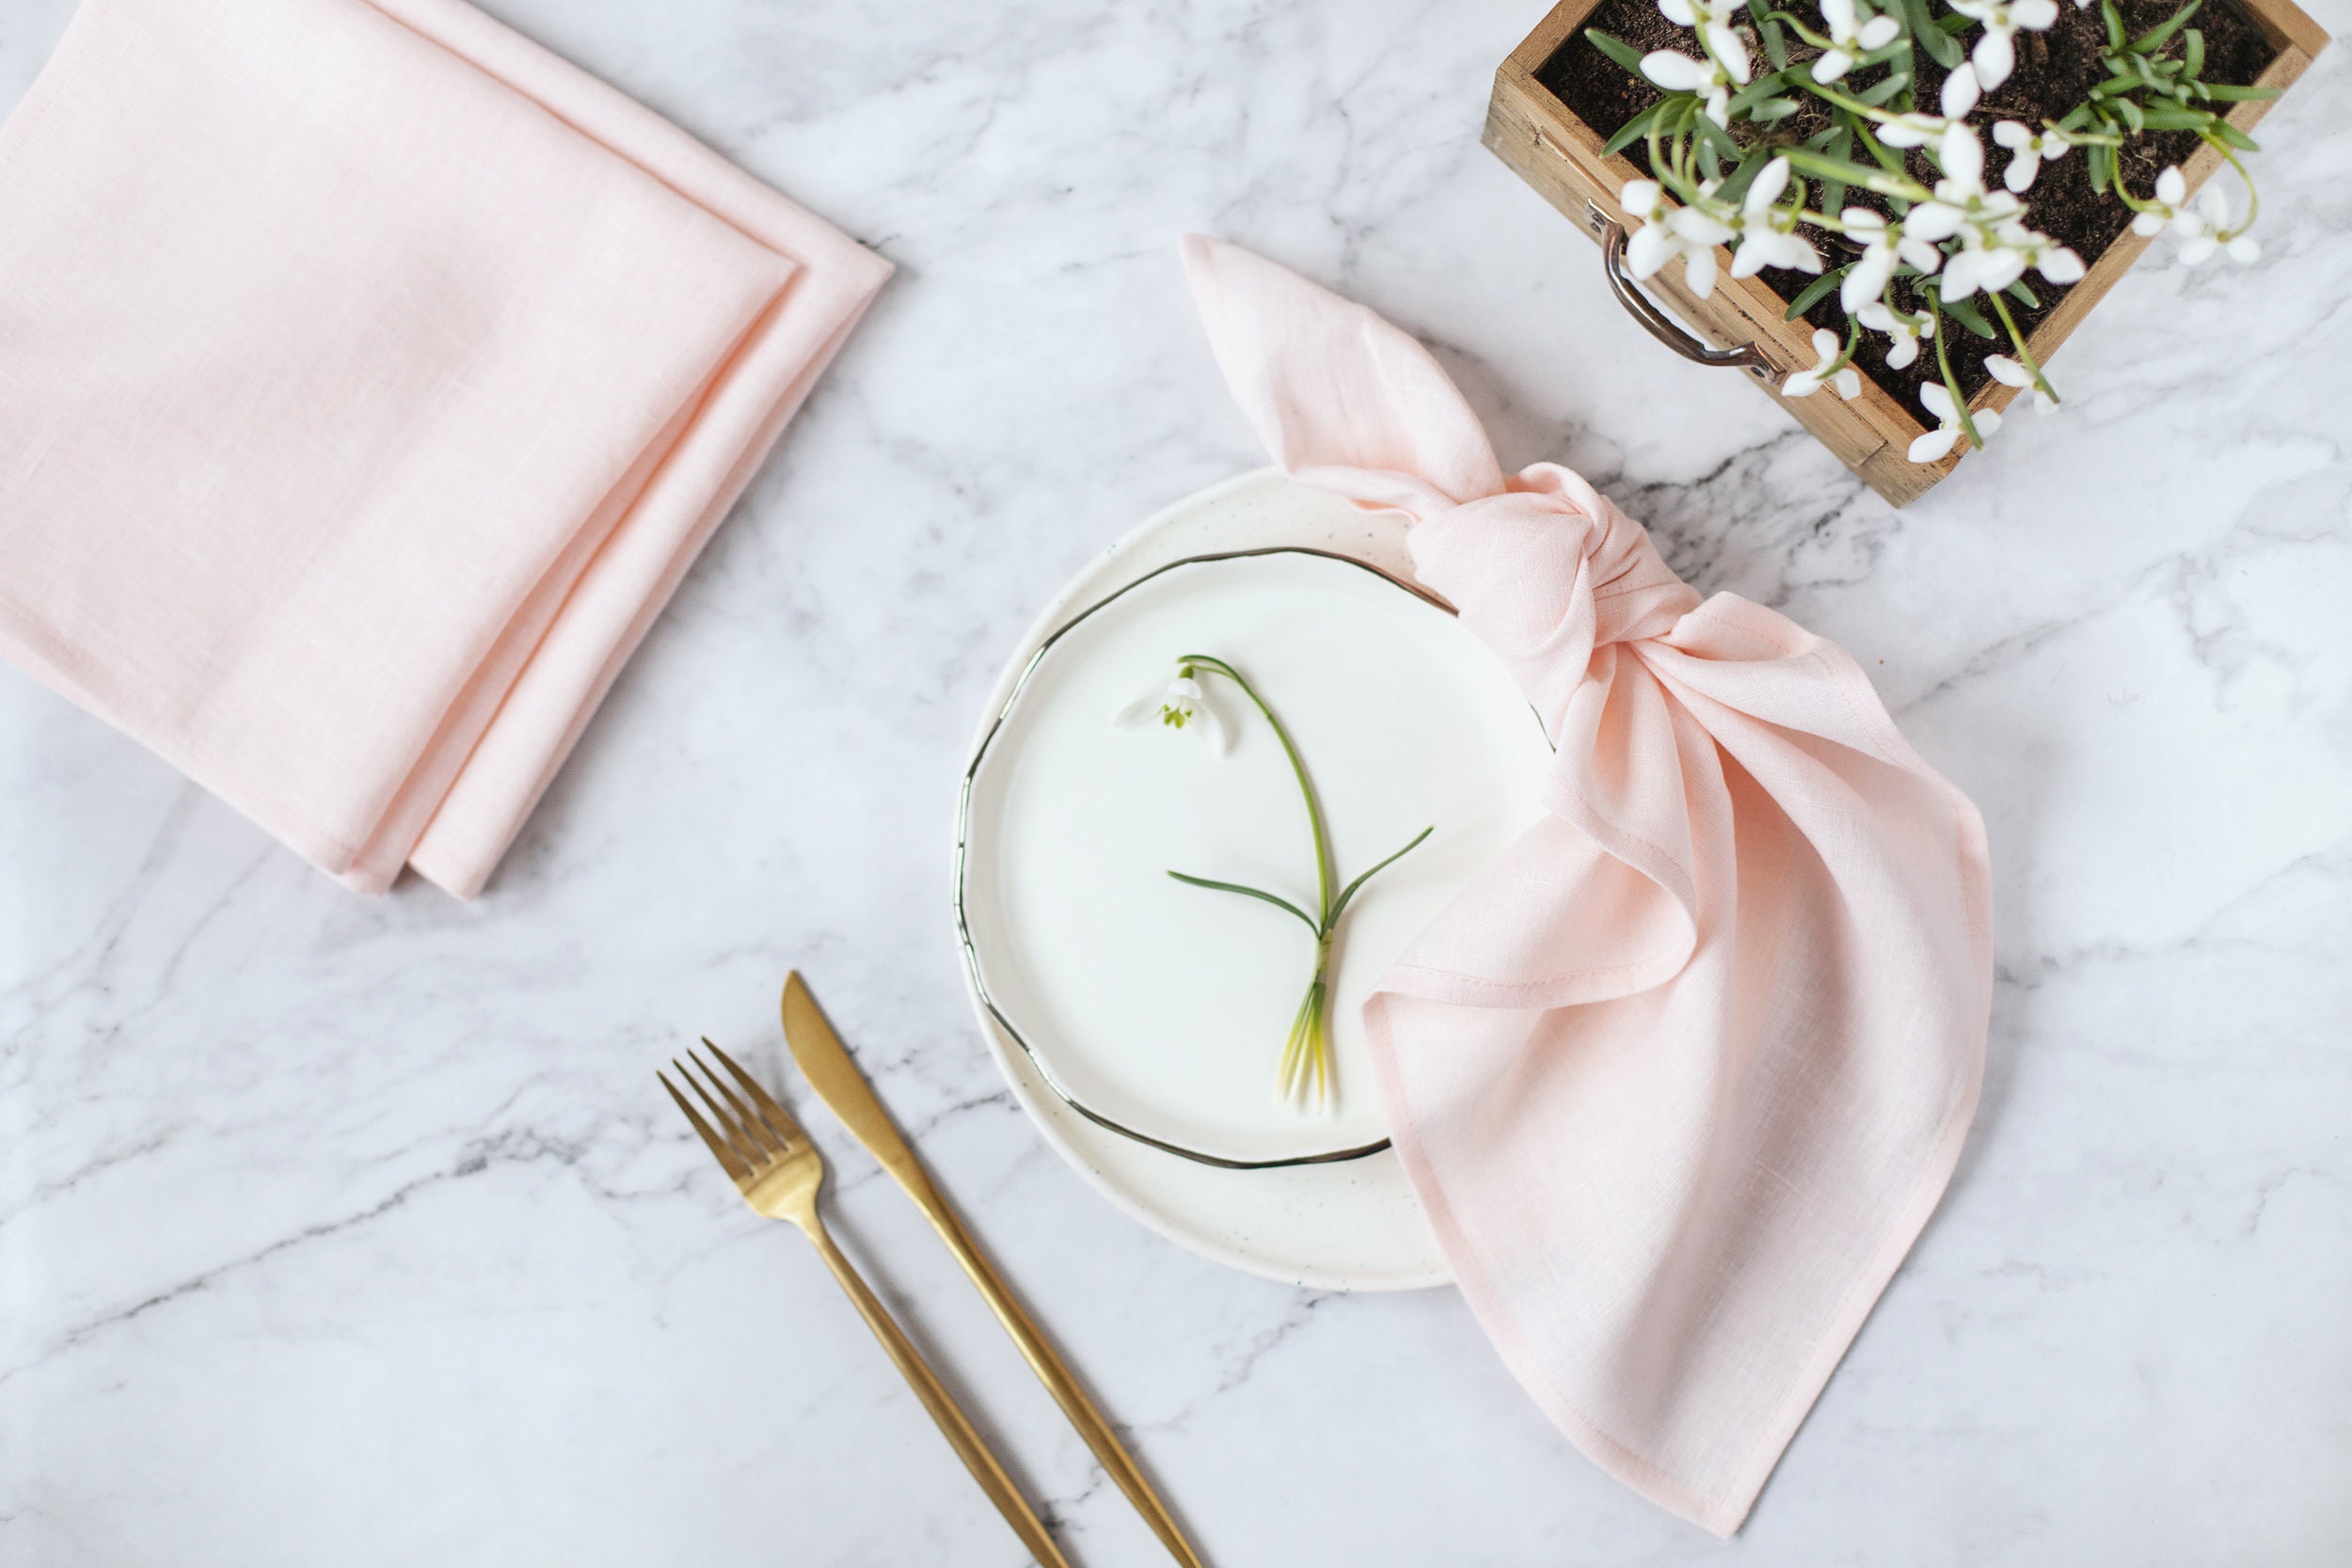 Pink Clay Linen Napkin (set of 4 or 6) — FOLD